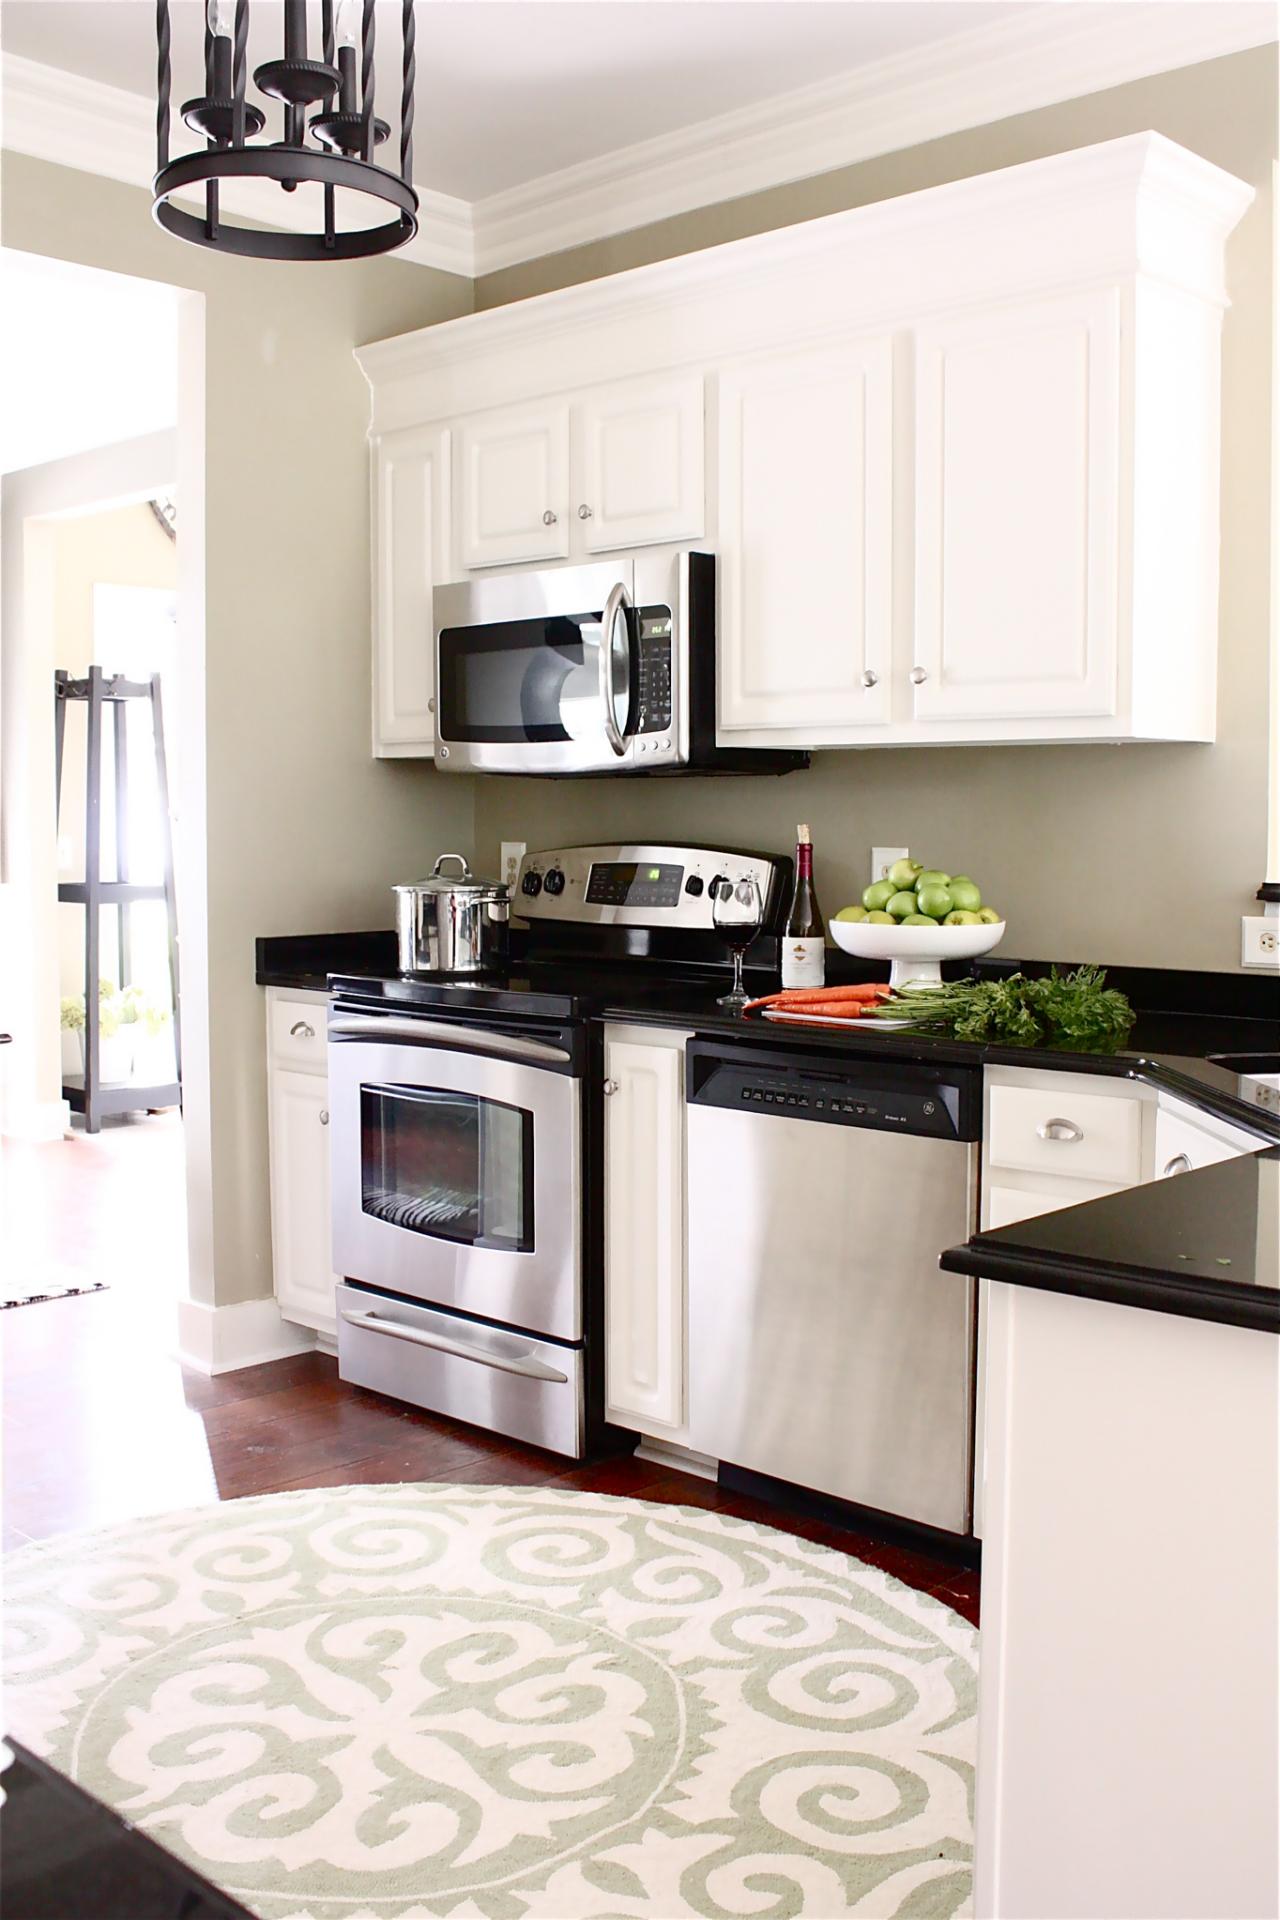 Tall Kitchen Cabinets: Pictures, Ideas & Tips From HGTV | HGTV